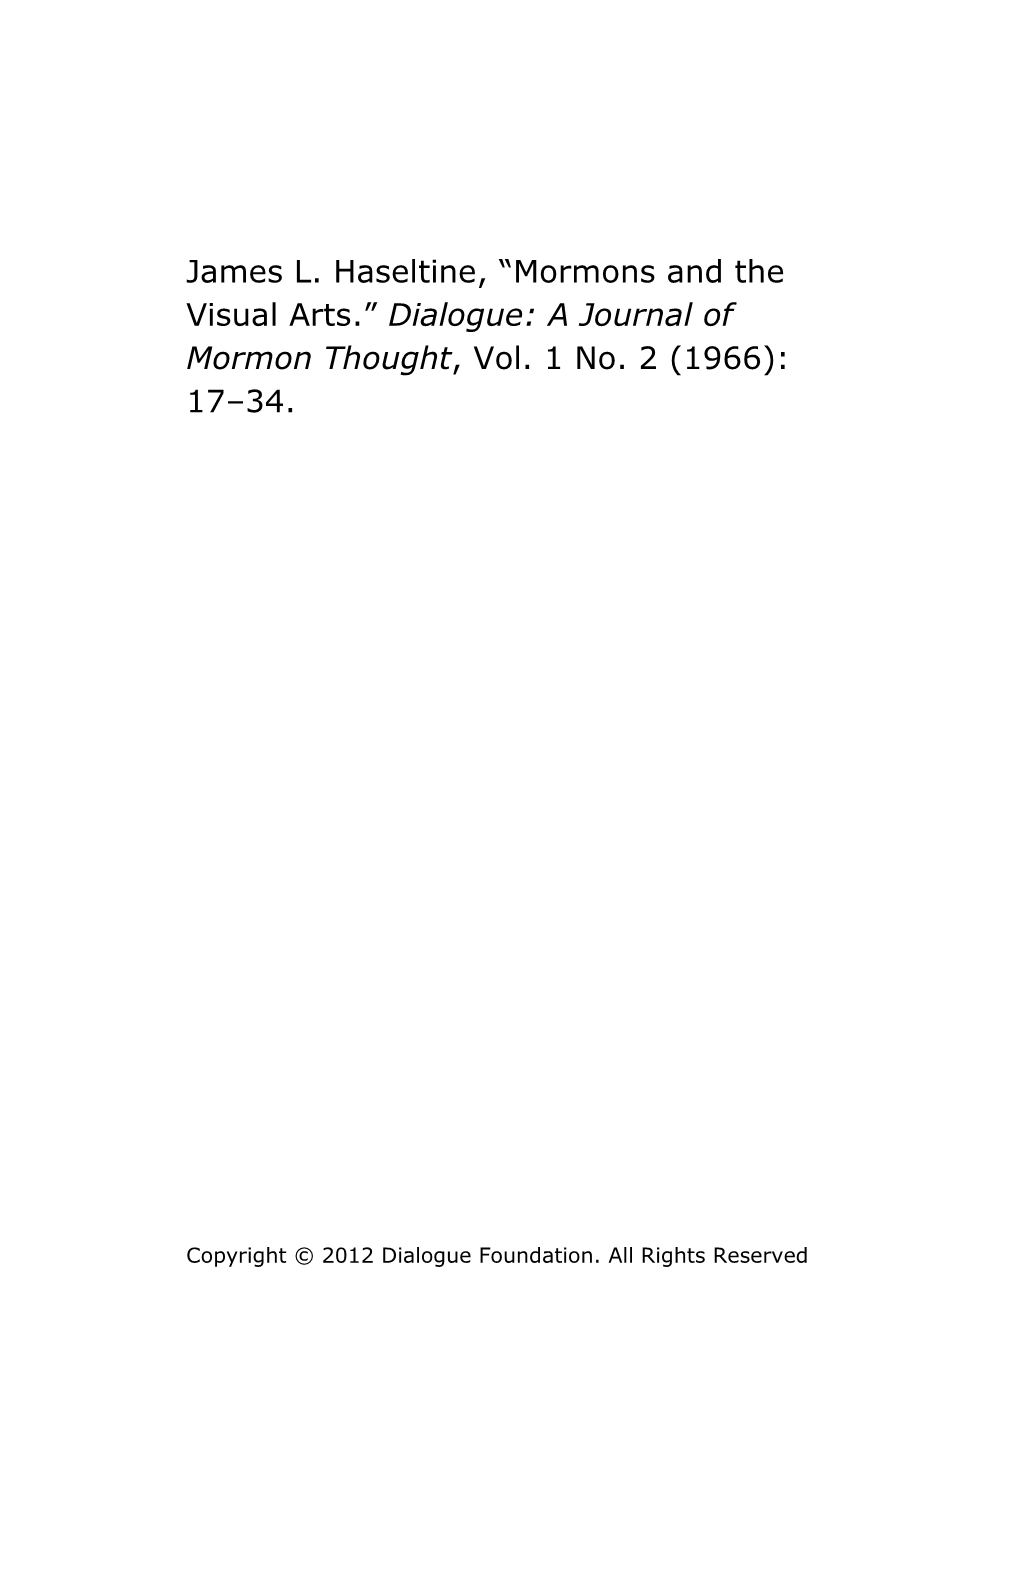 Mormons and the Visual Arts.” Dialogue: a Journal of Mormon Thought, Vol